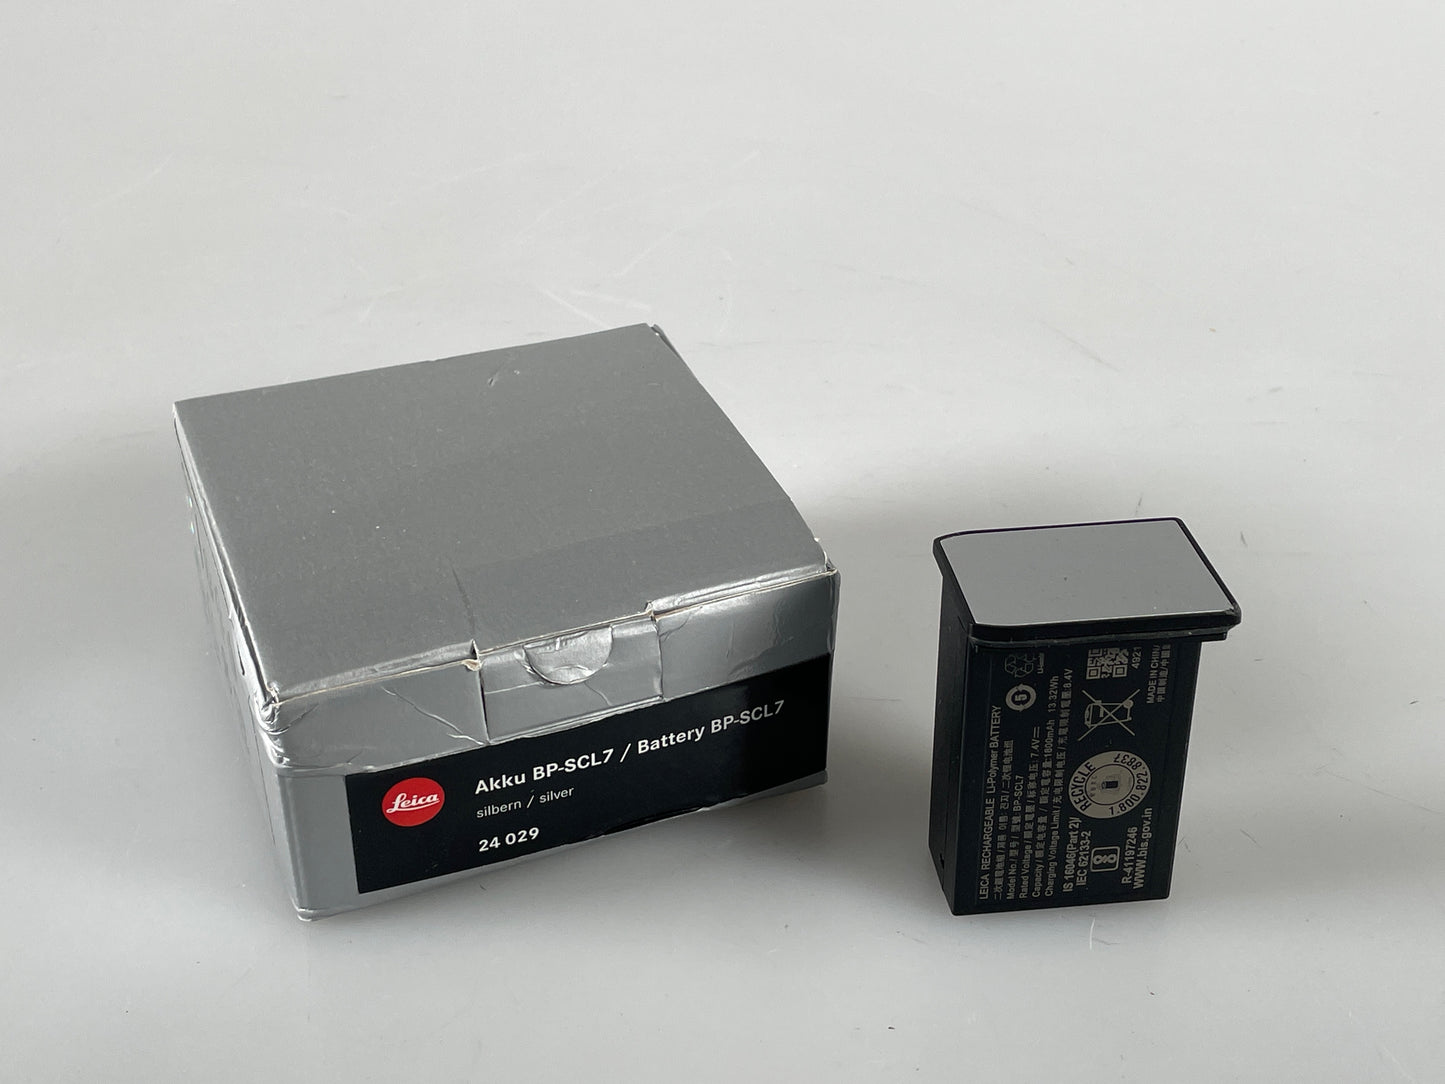 Leica BP-SCL7 Lithium-Ion Battery silver 24029 for M11 Camera